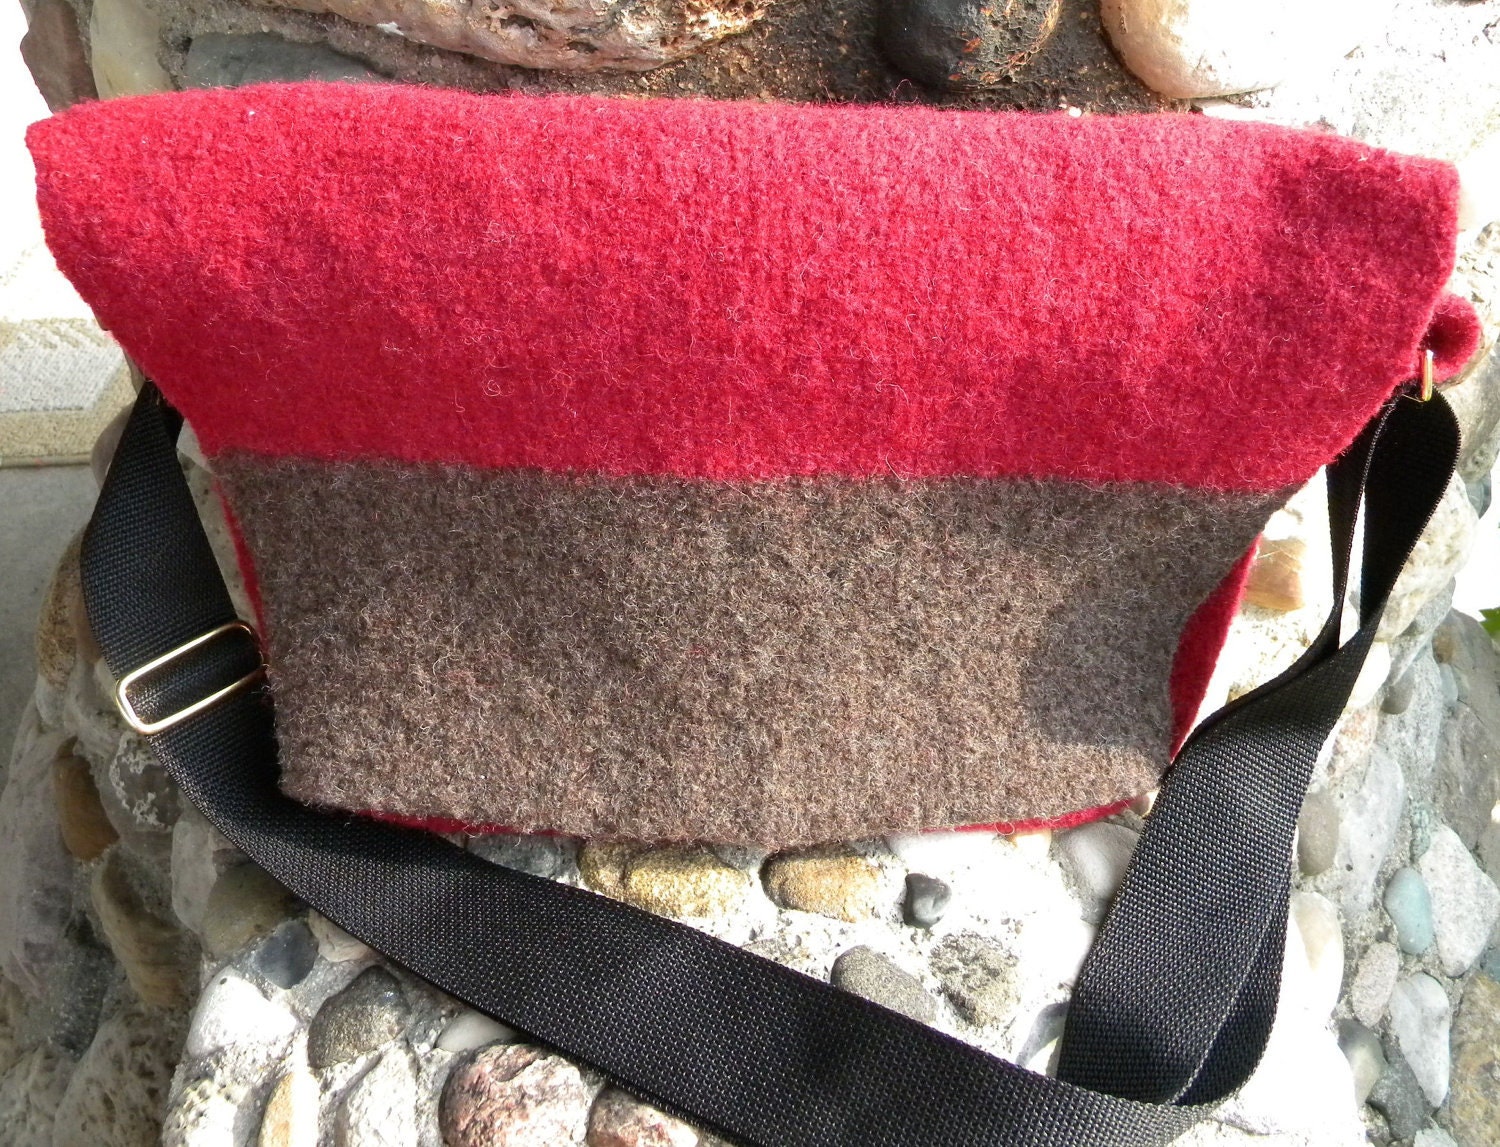 Rugged Felted Wool Messenger Bag or Laptop Tote, Red and Brown, Mans or Womans